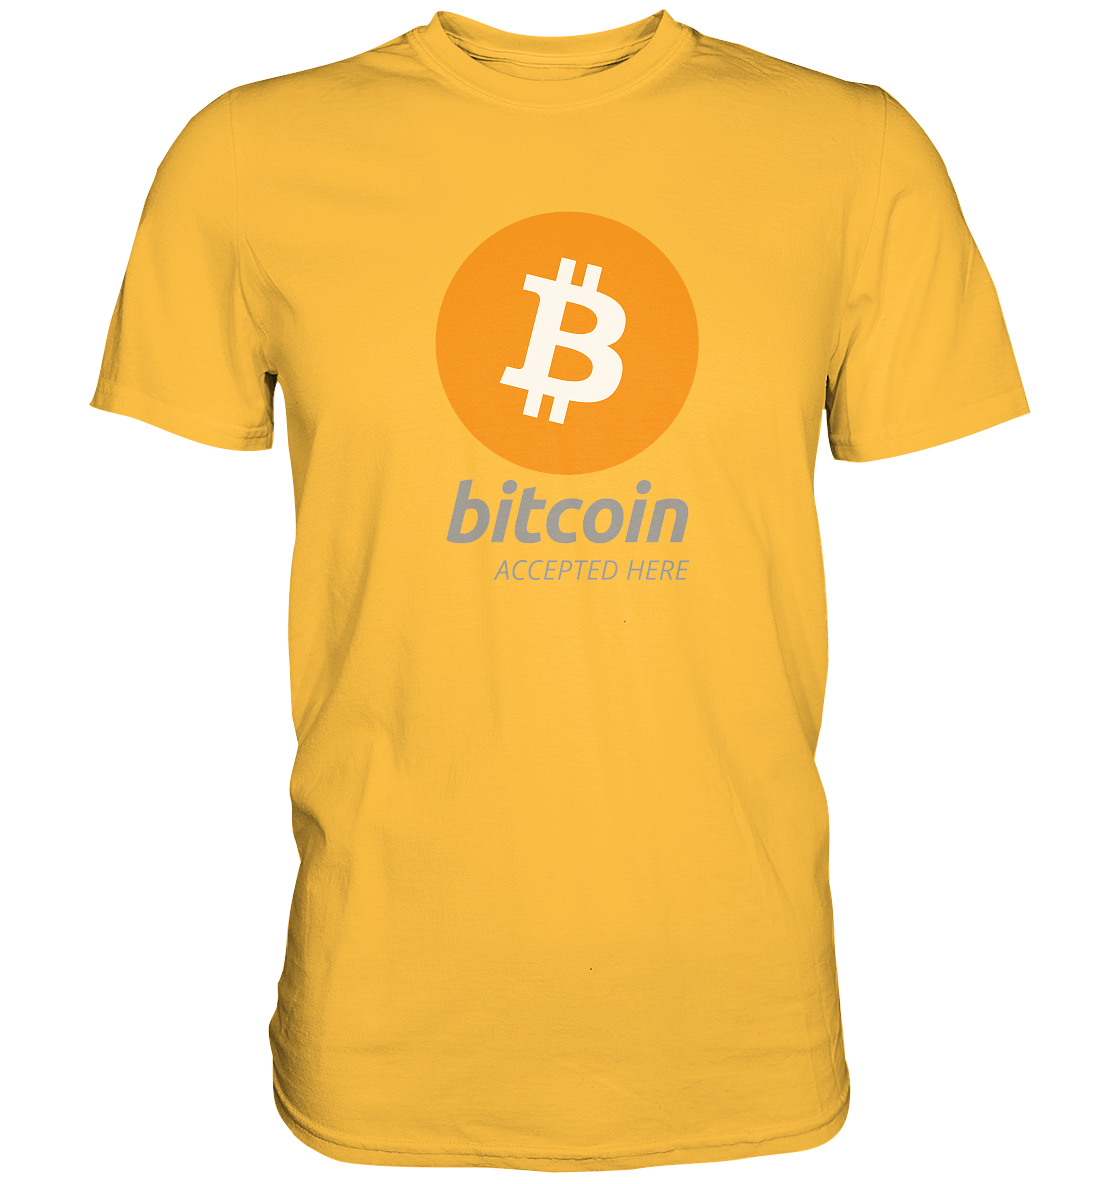 Bitcoin accepted here - Premium Shirt